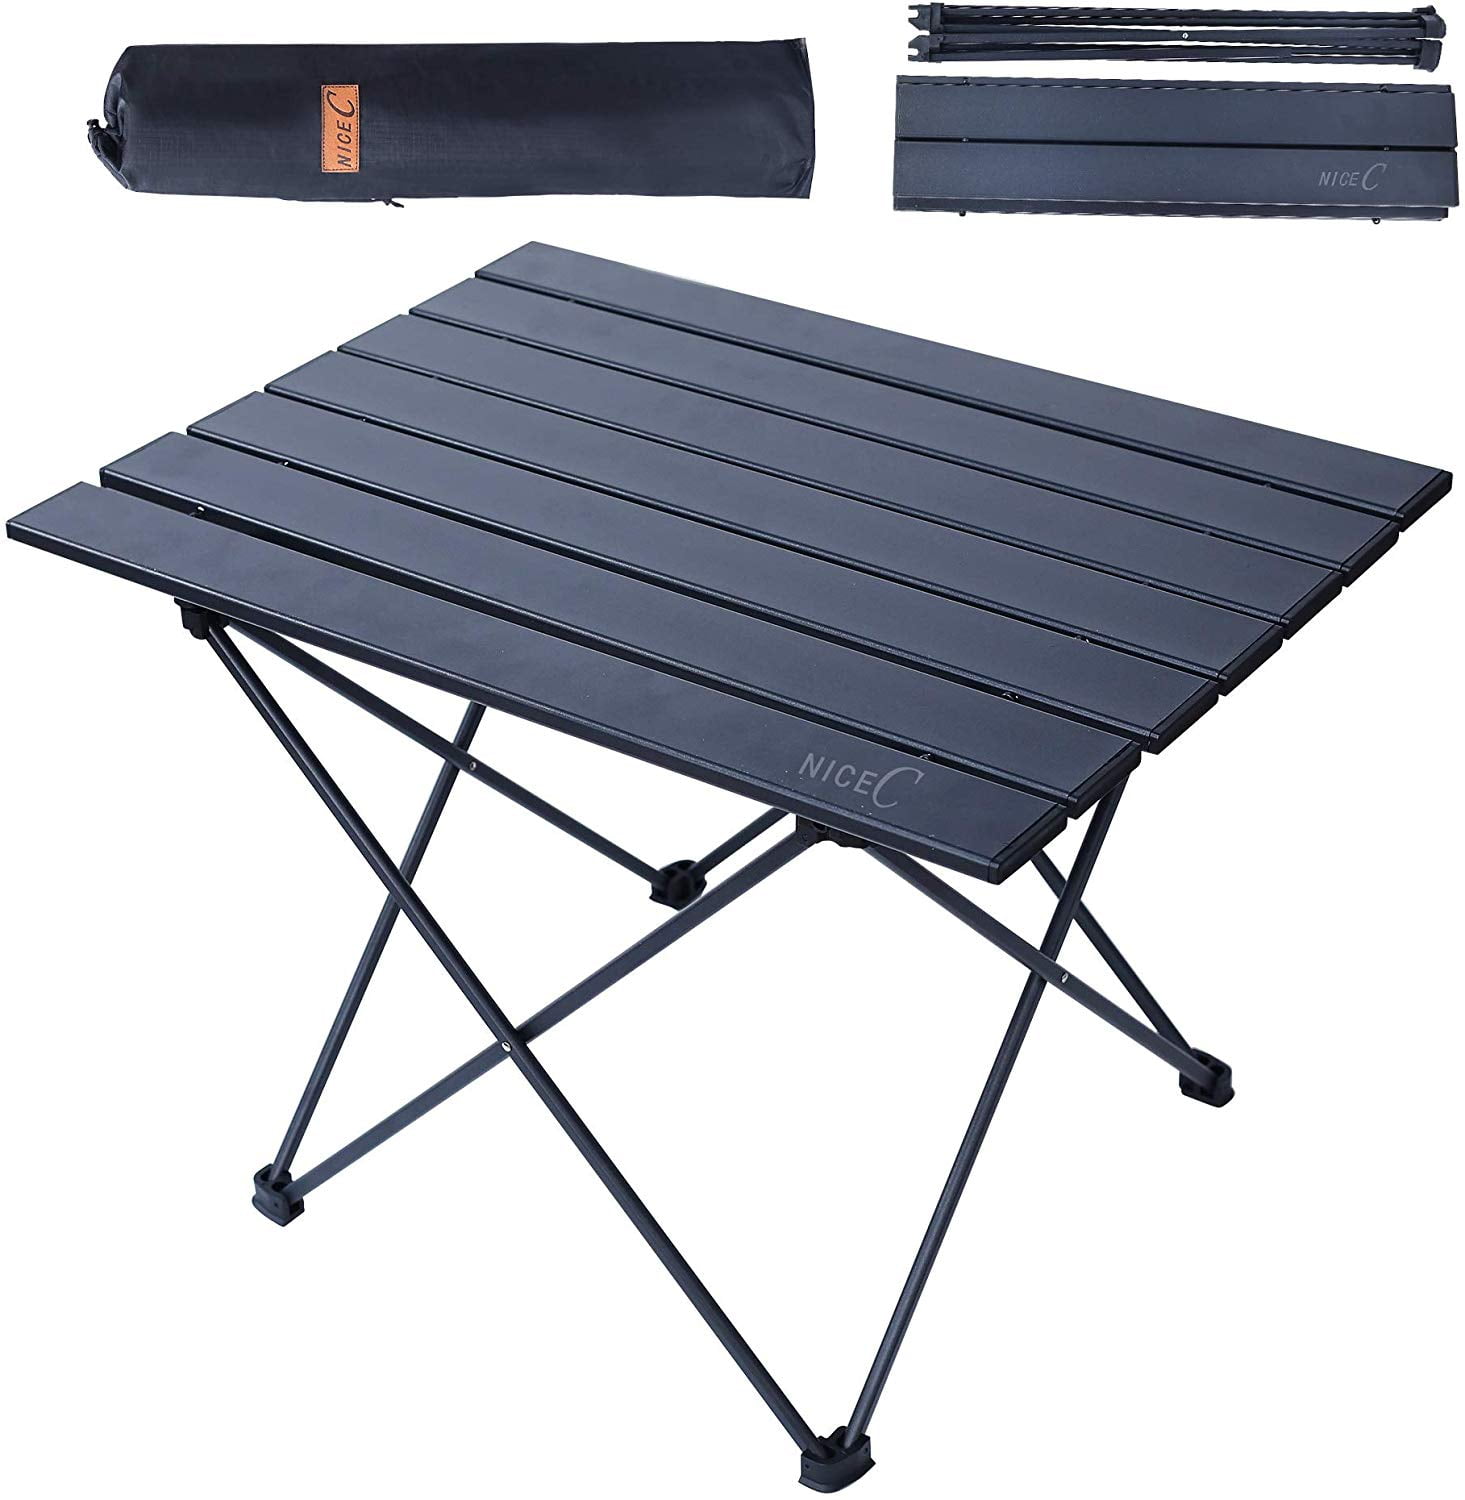 5-PC Outdoor Foldable Portable Lightweight Camping Table Chairs Set W/Carry Bag 